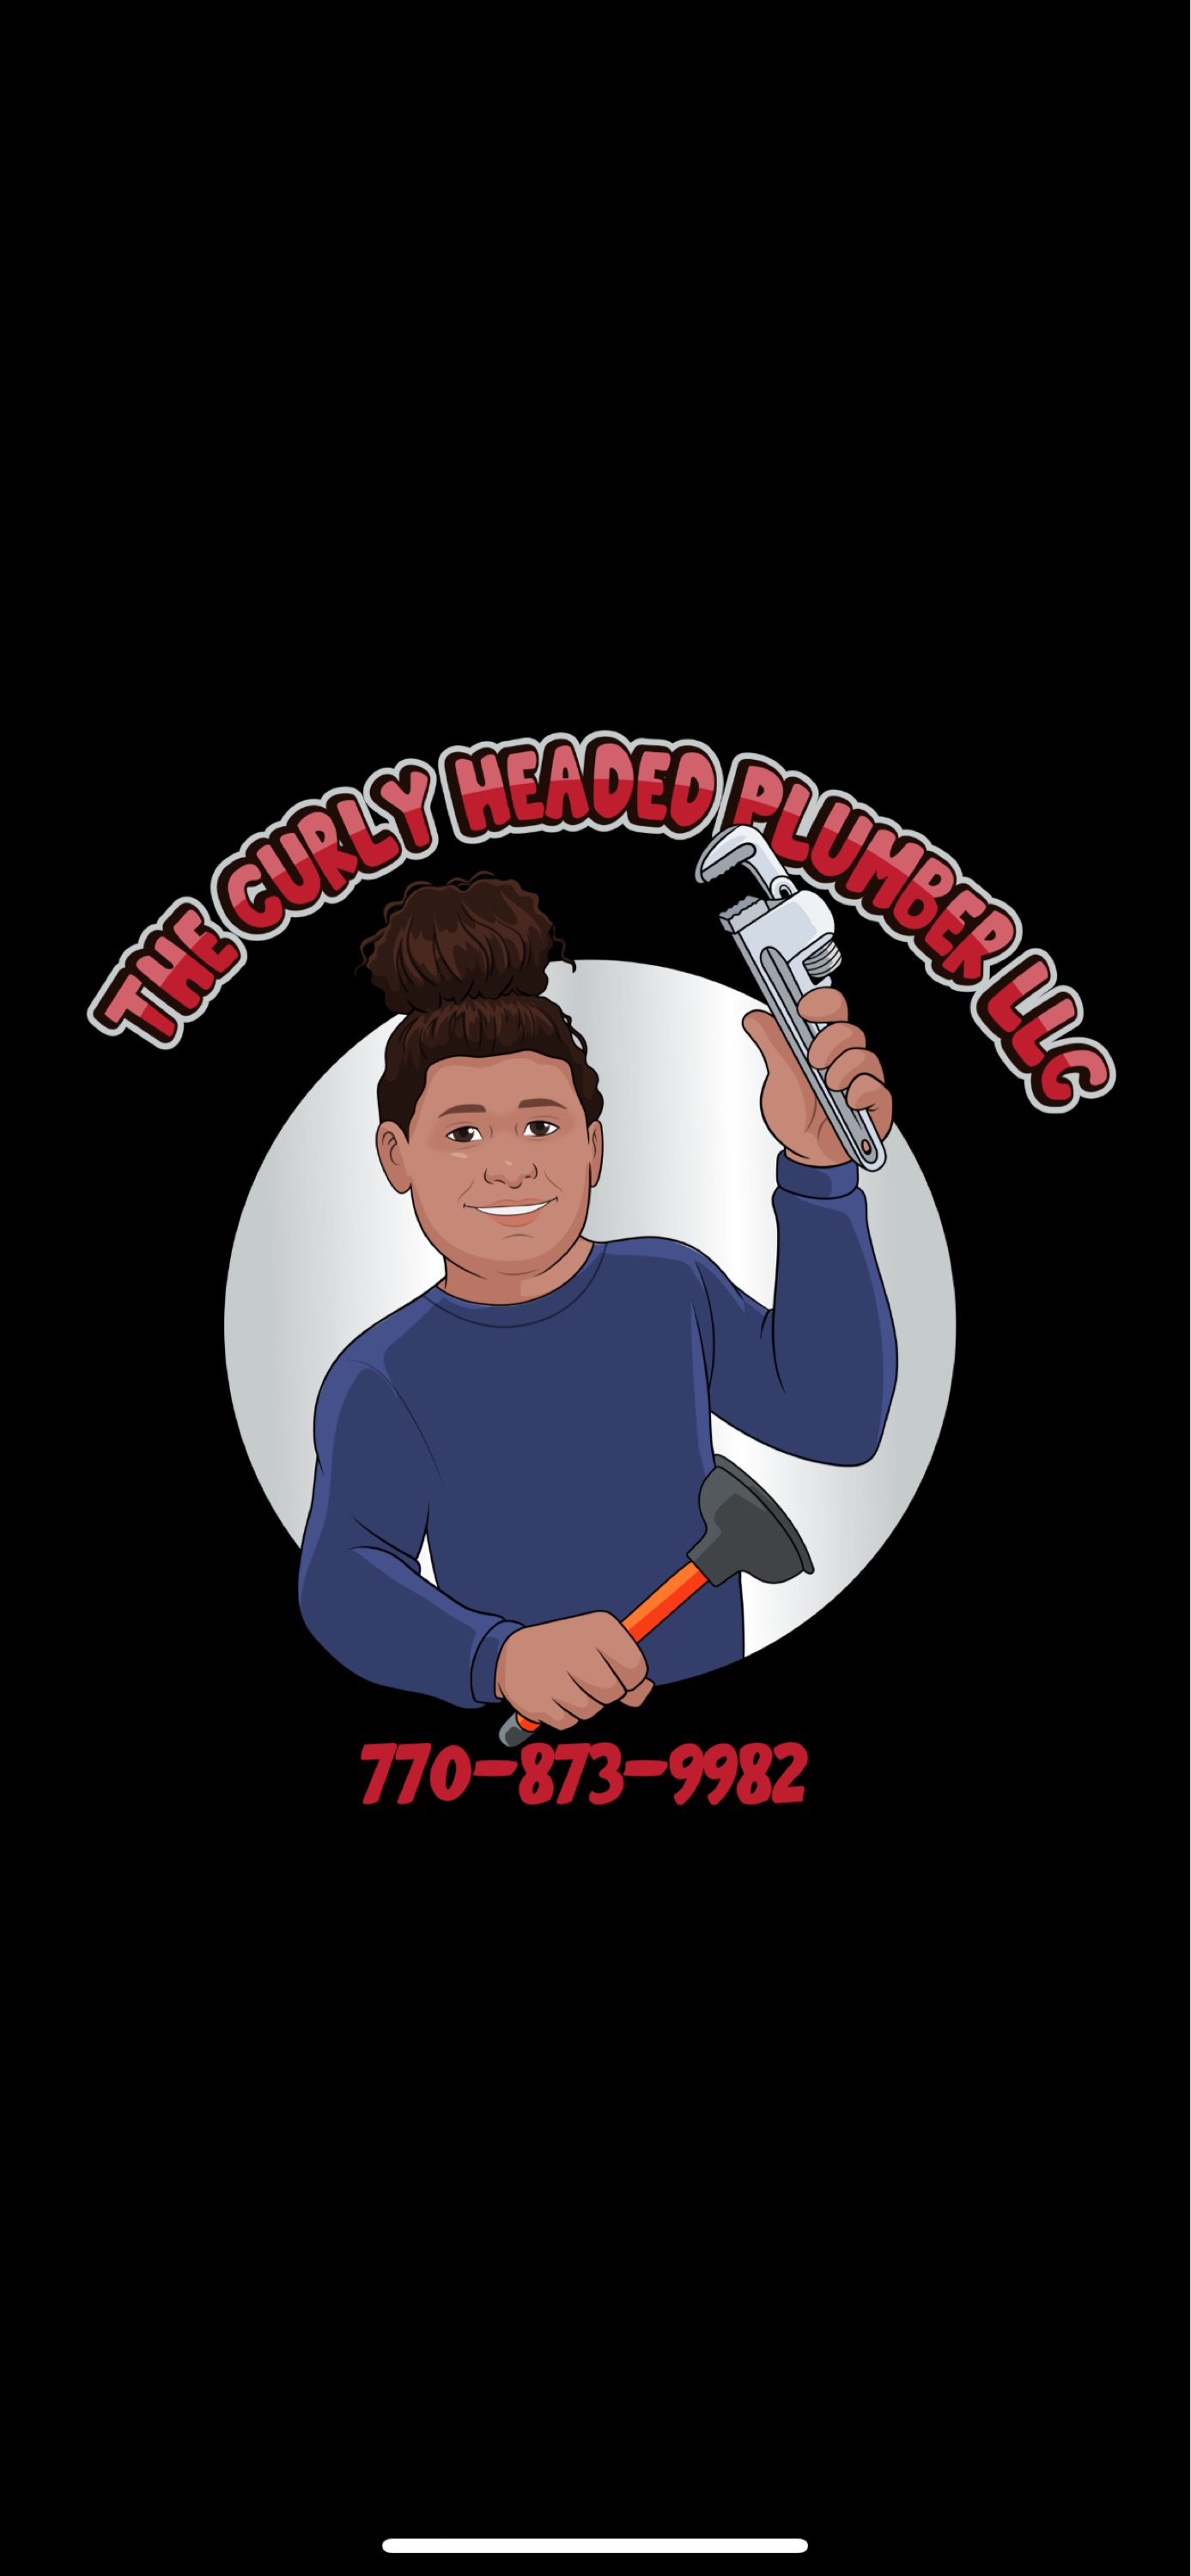 The Curly Headed Plumber Logo